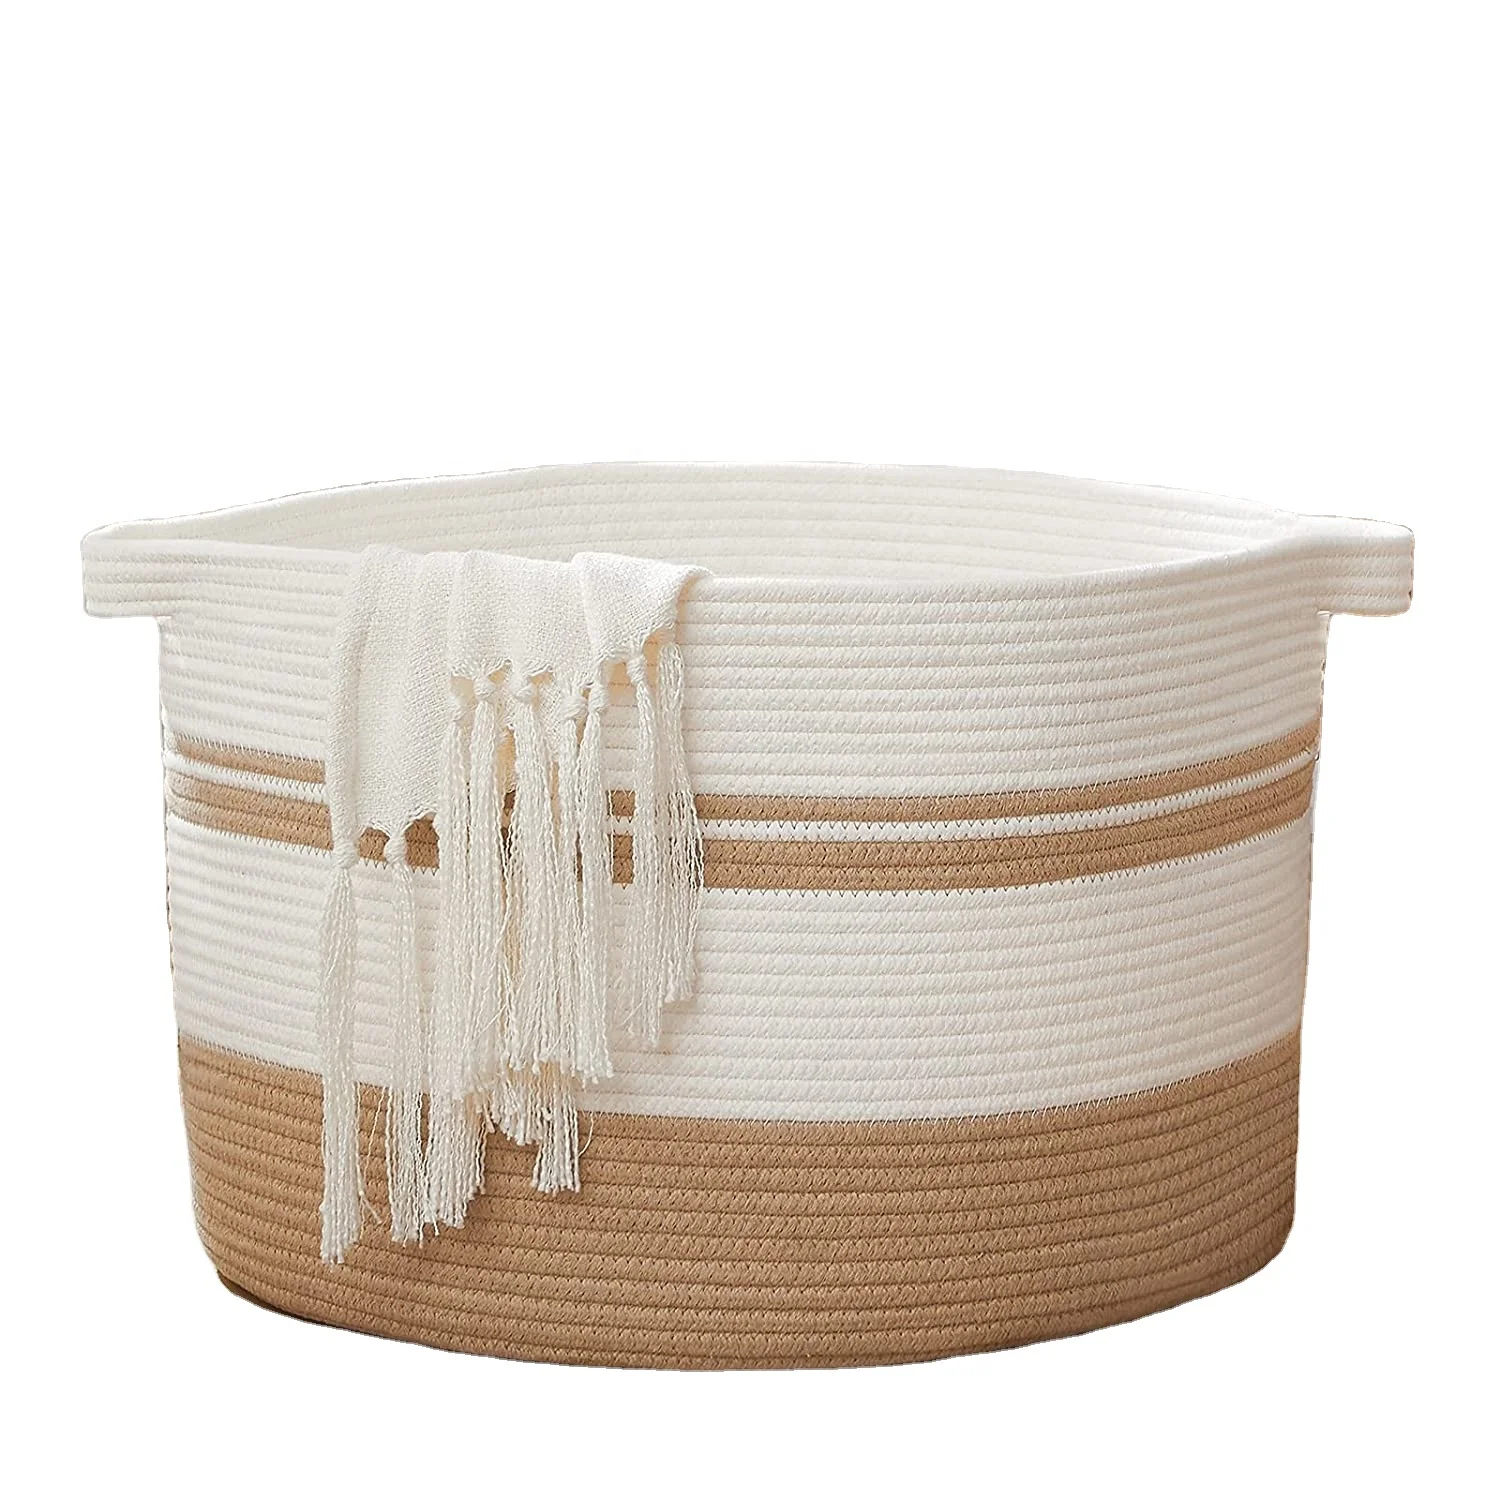 

Cotton rope laundry basket with handles big capacity collapsible woven handmade hamper